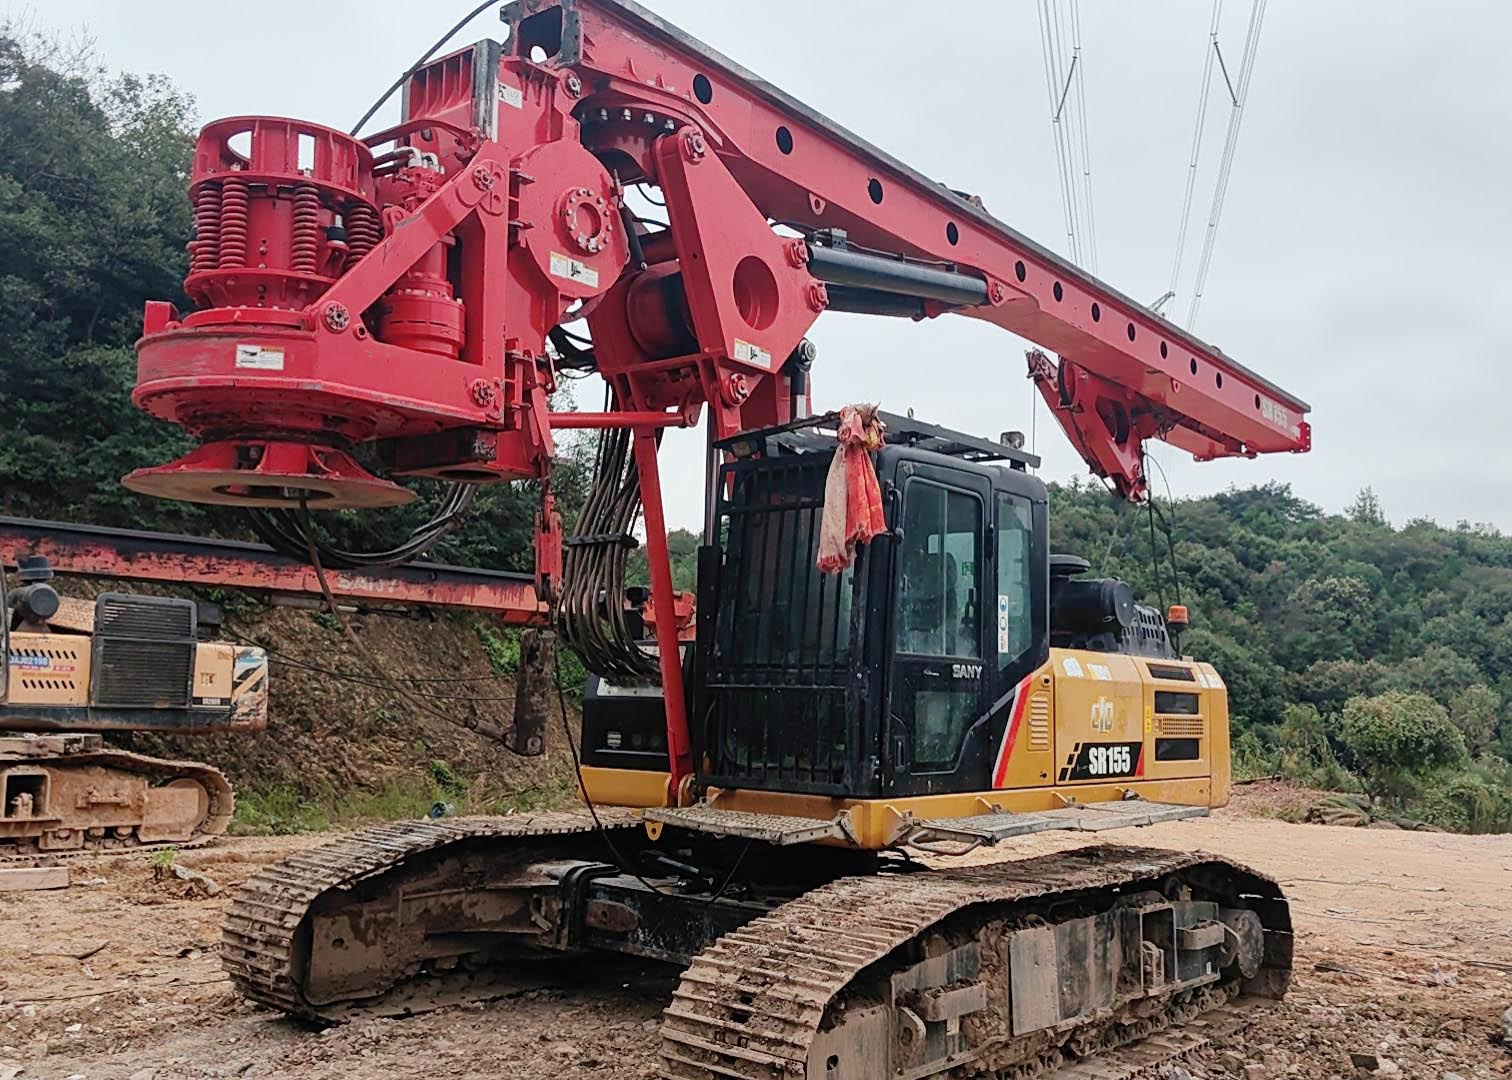 https://www.imachinemall.com/2020-sany-sr155-rotary-drilling-rig-product/